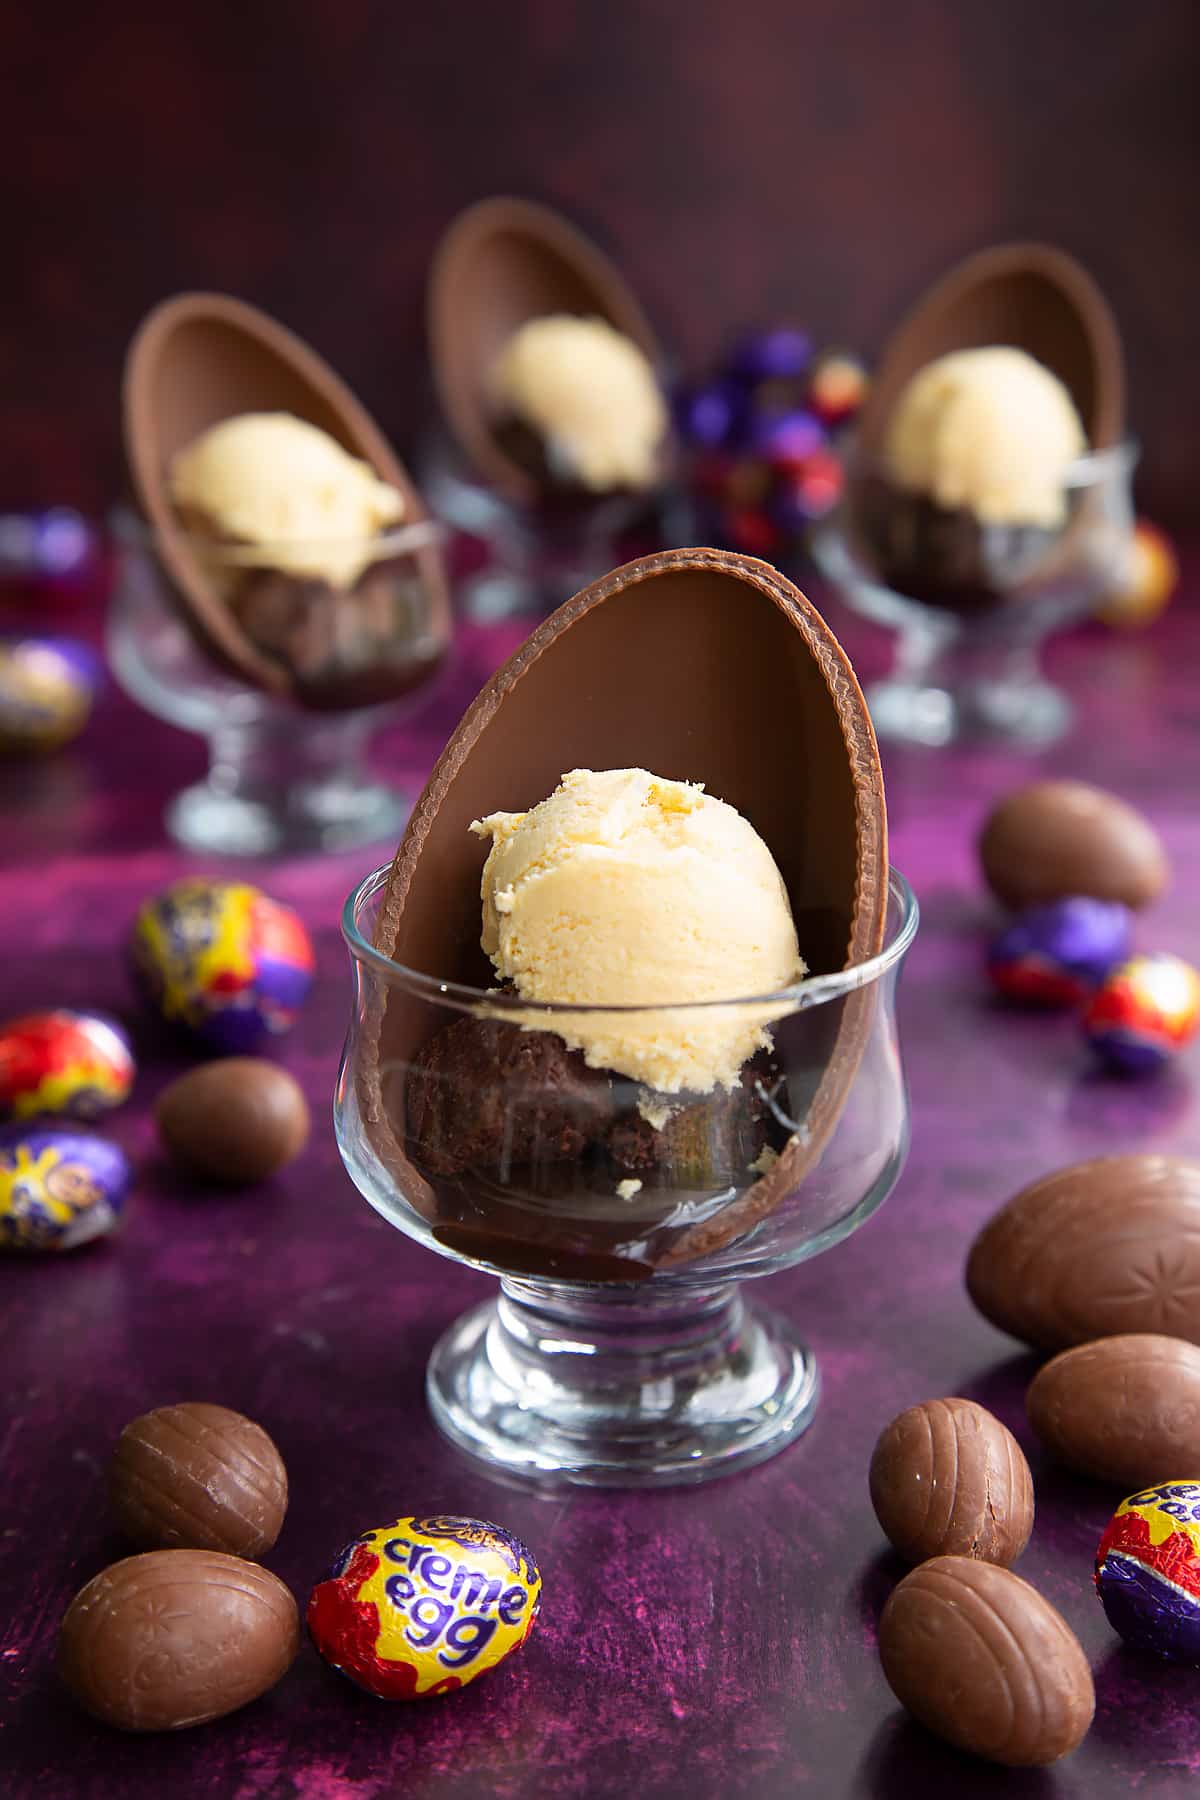 Adding scoops of ice cream ontop of the brownie bites inside the Easter egg half. 